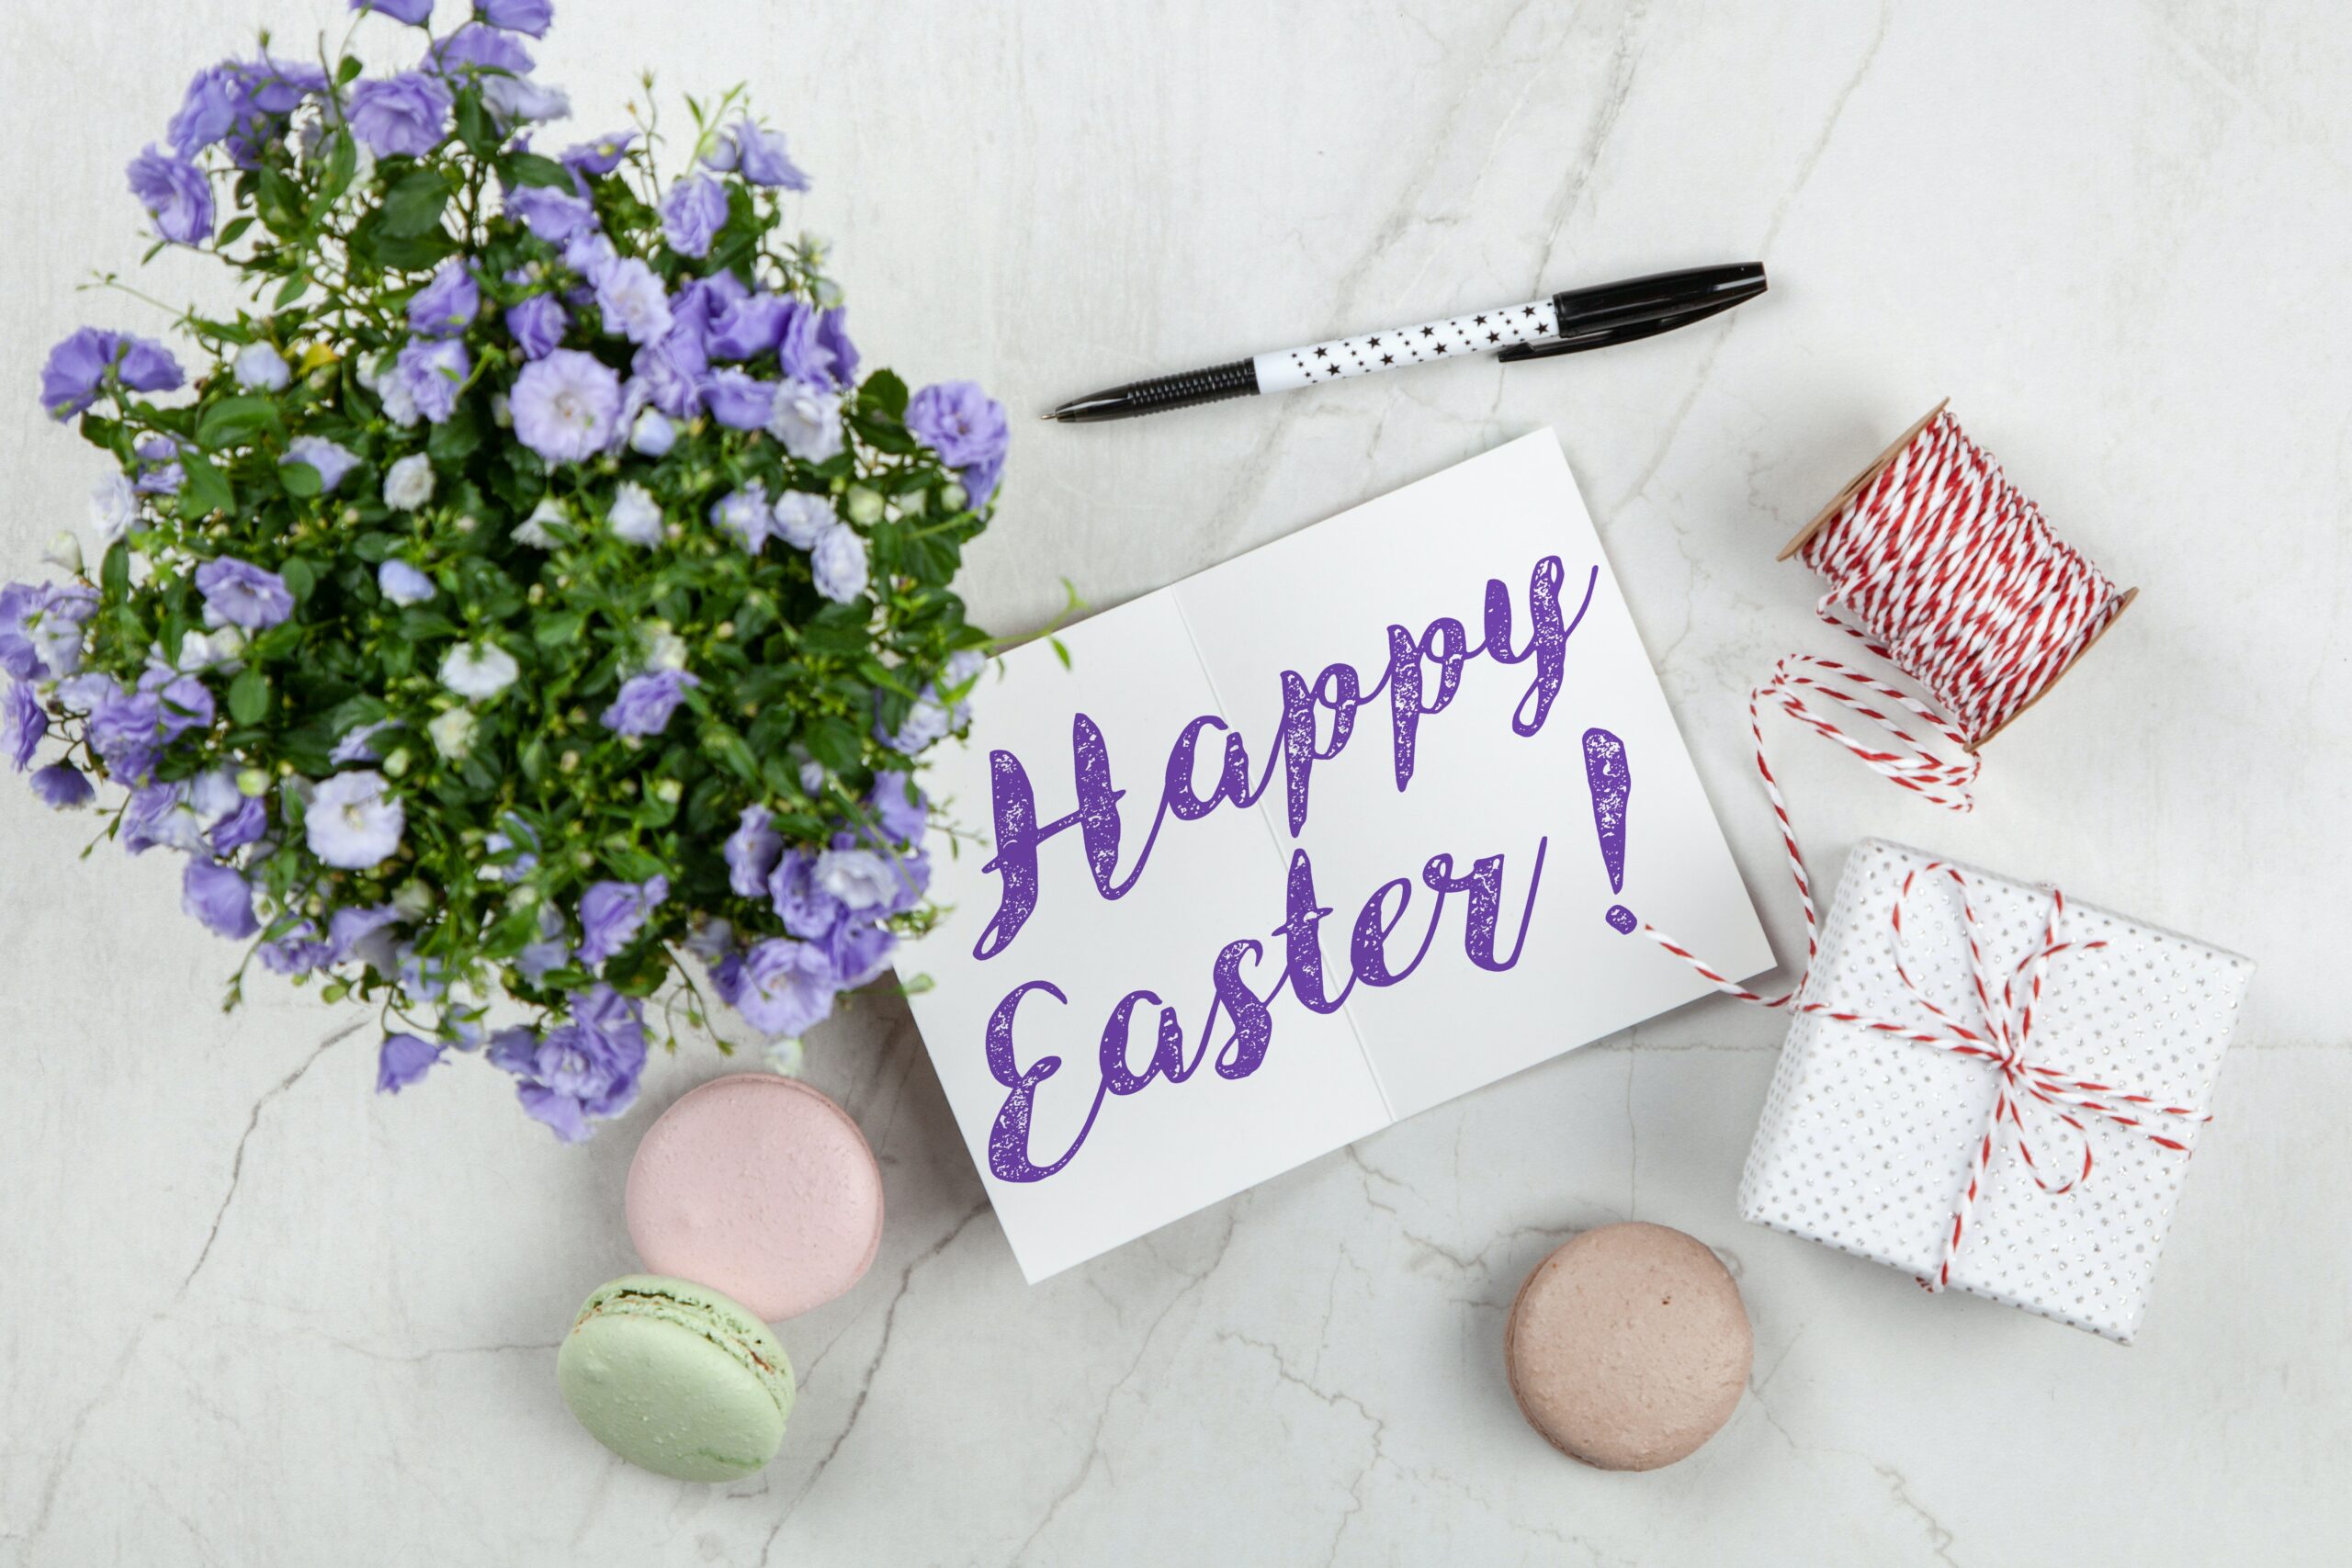 Happy Easter to our freelancing community